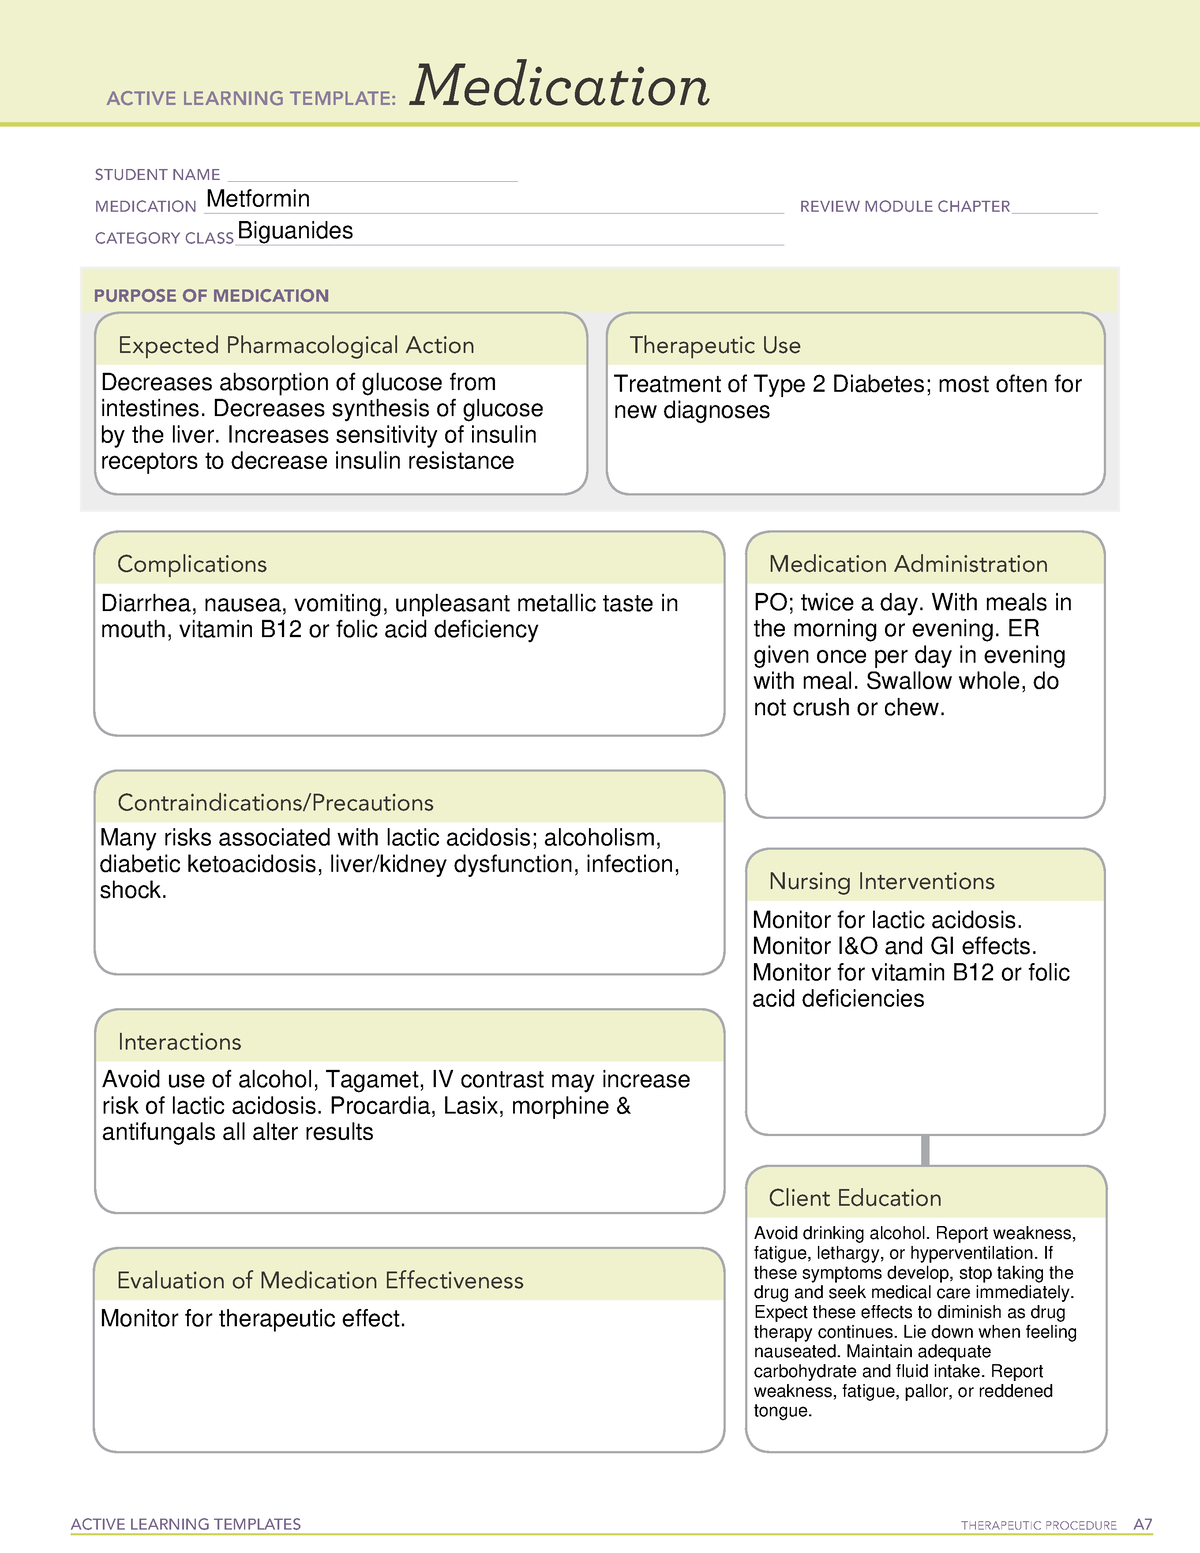 Active Learning Template Metformin ACTIVE LEARNING TEMPLATES